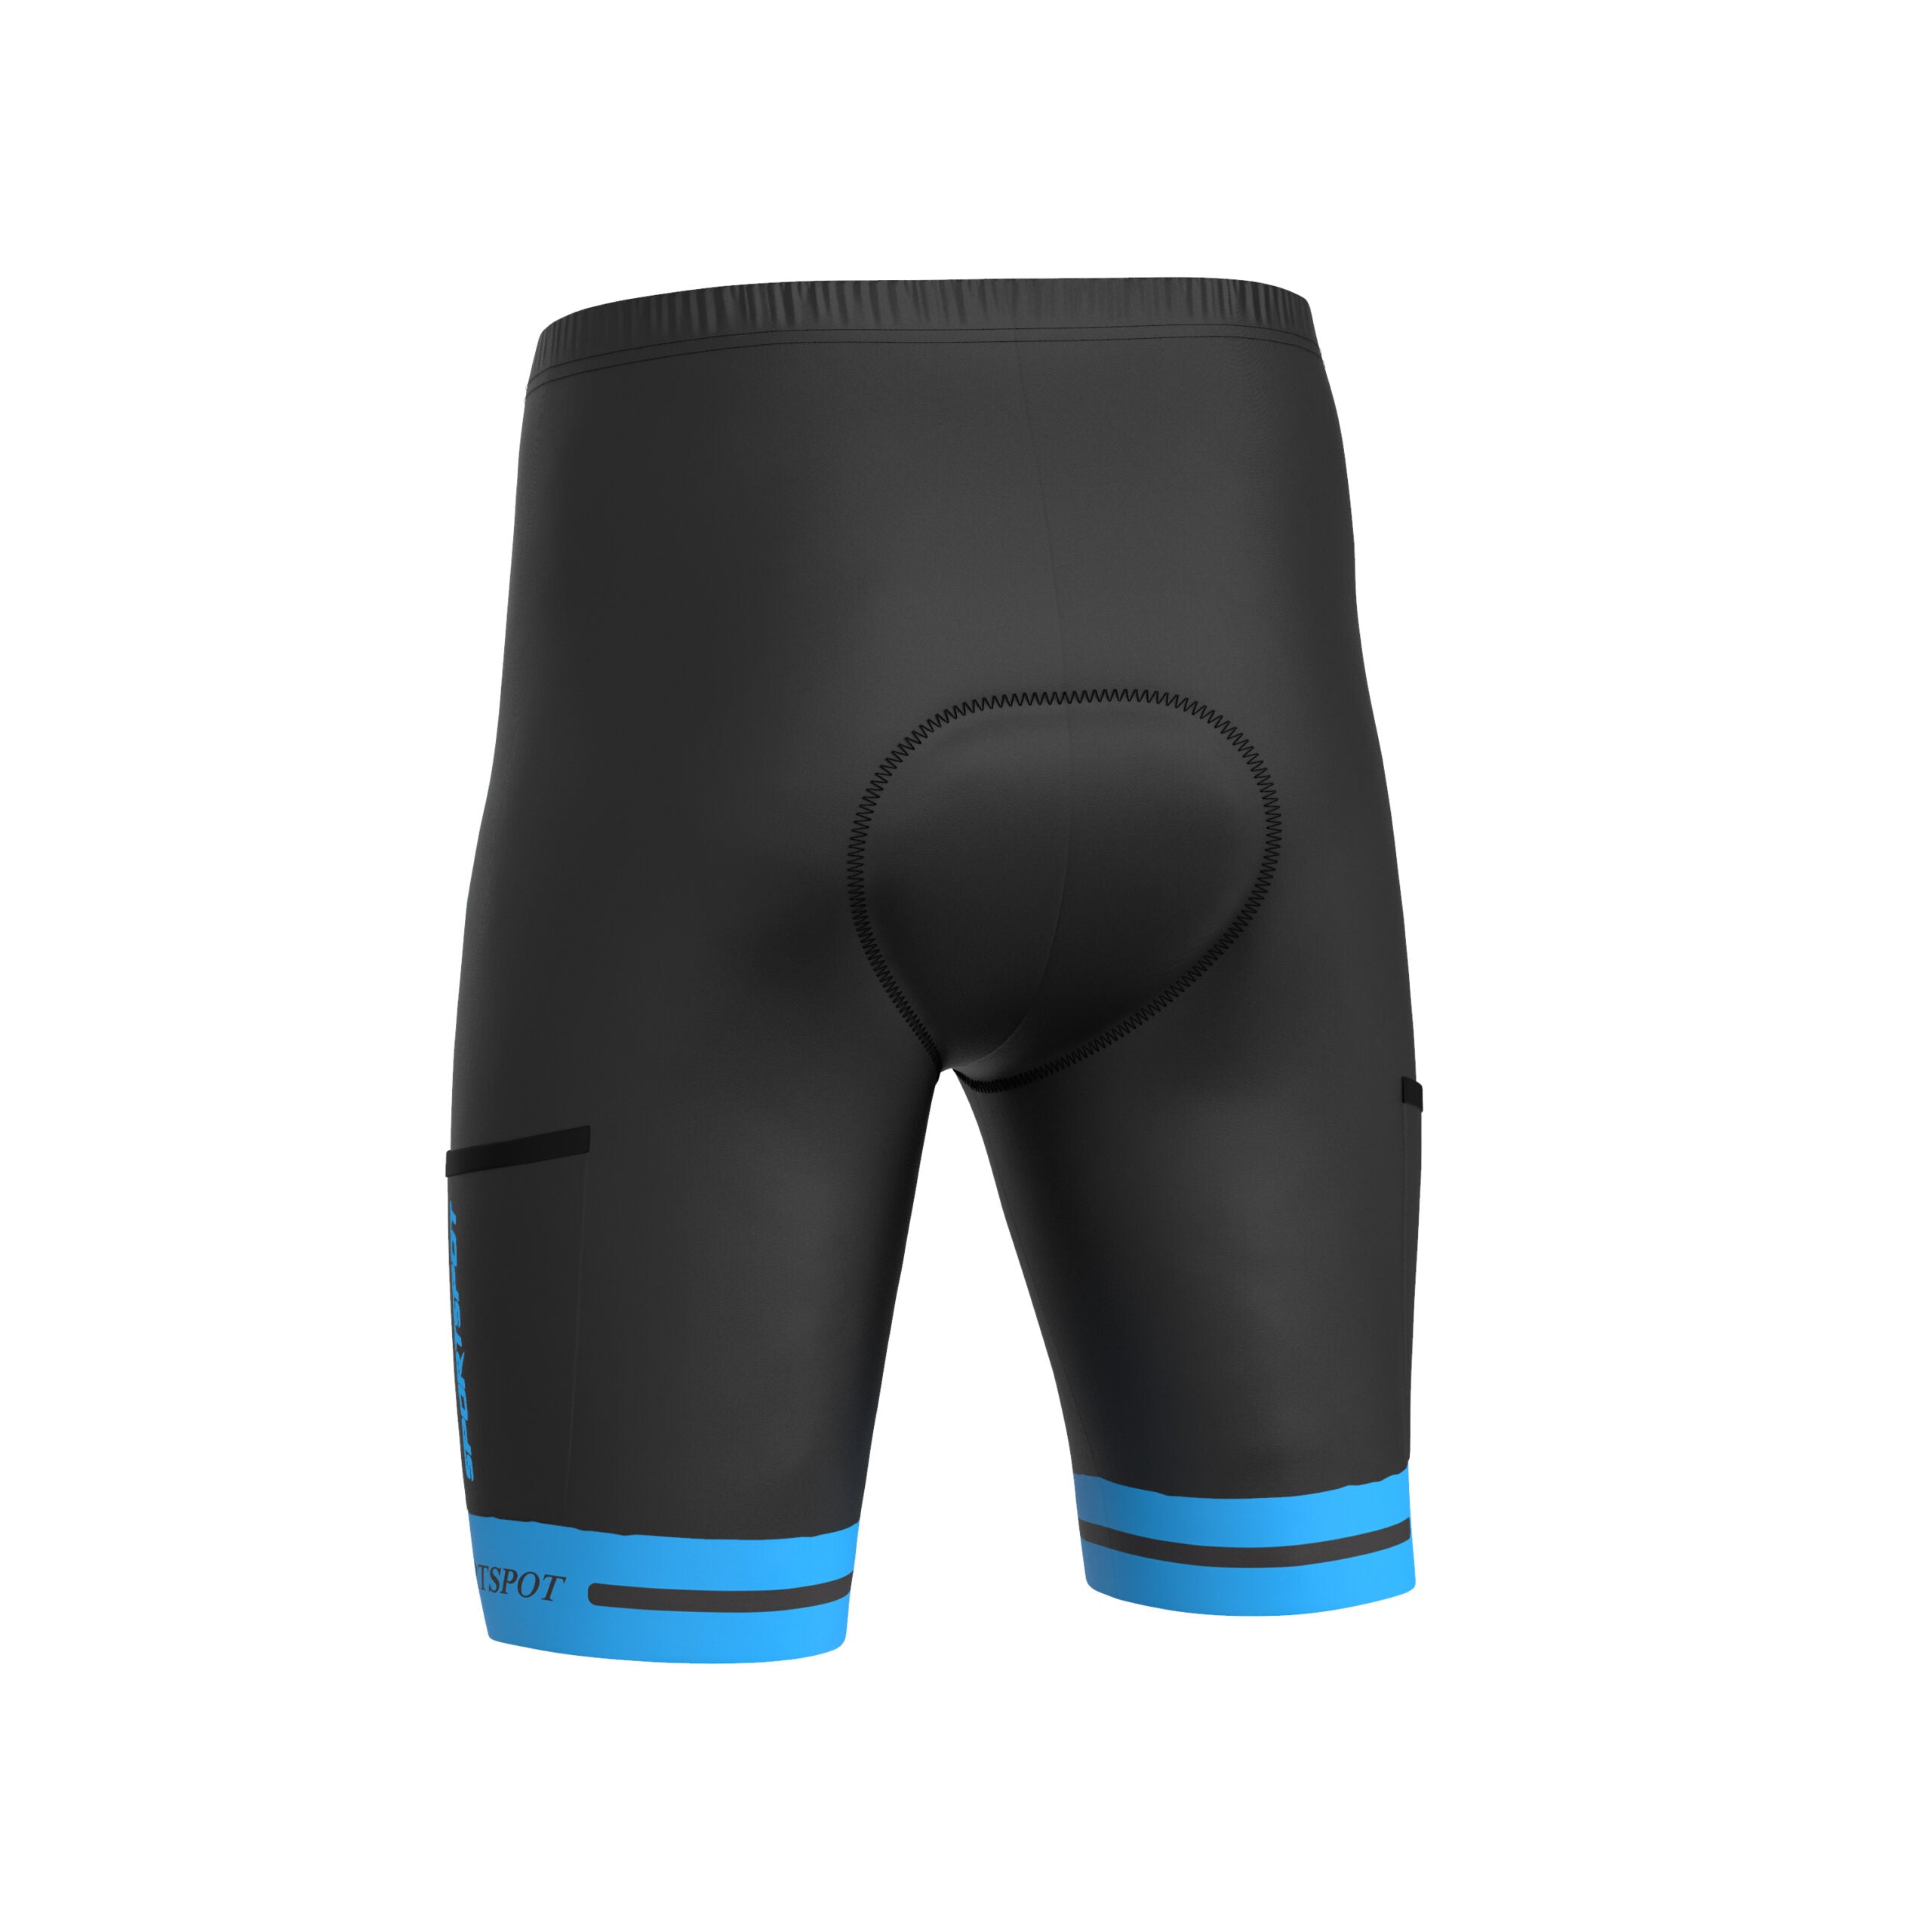 mens padded bicycling shorts witth blue accents